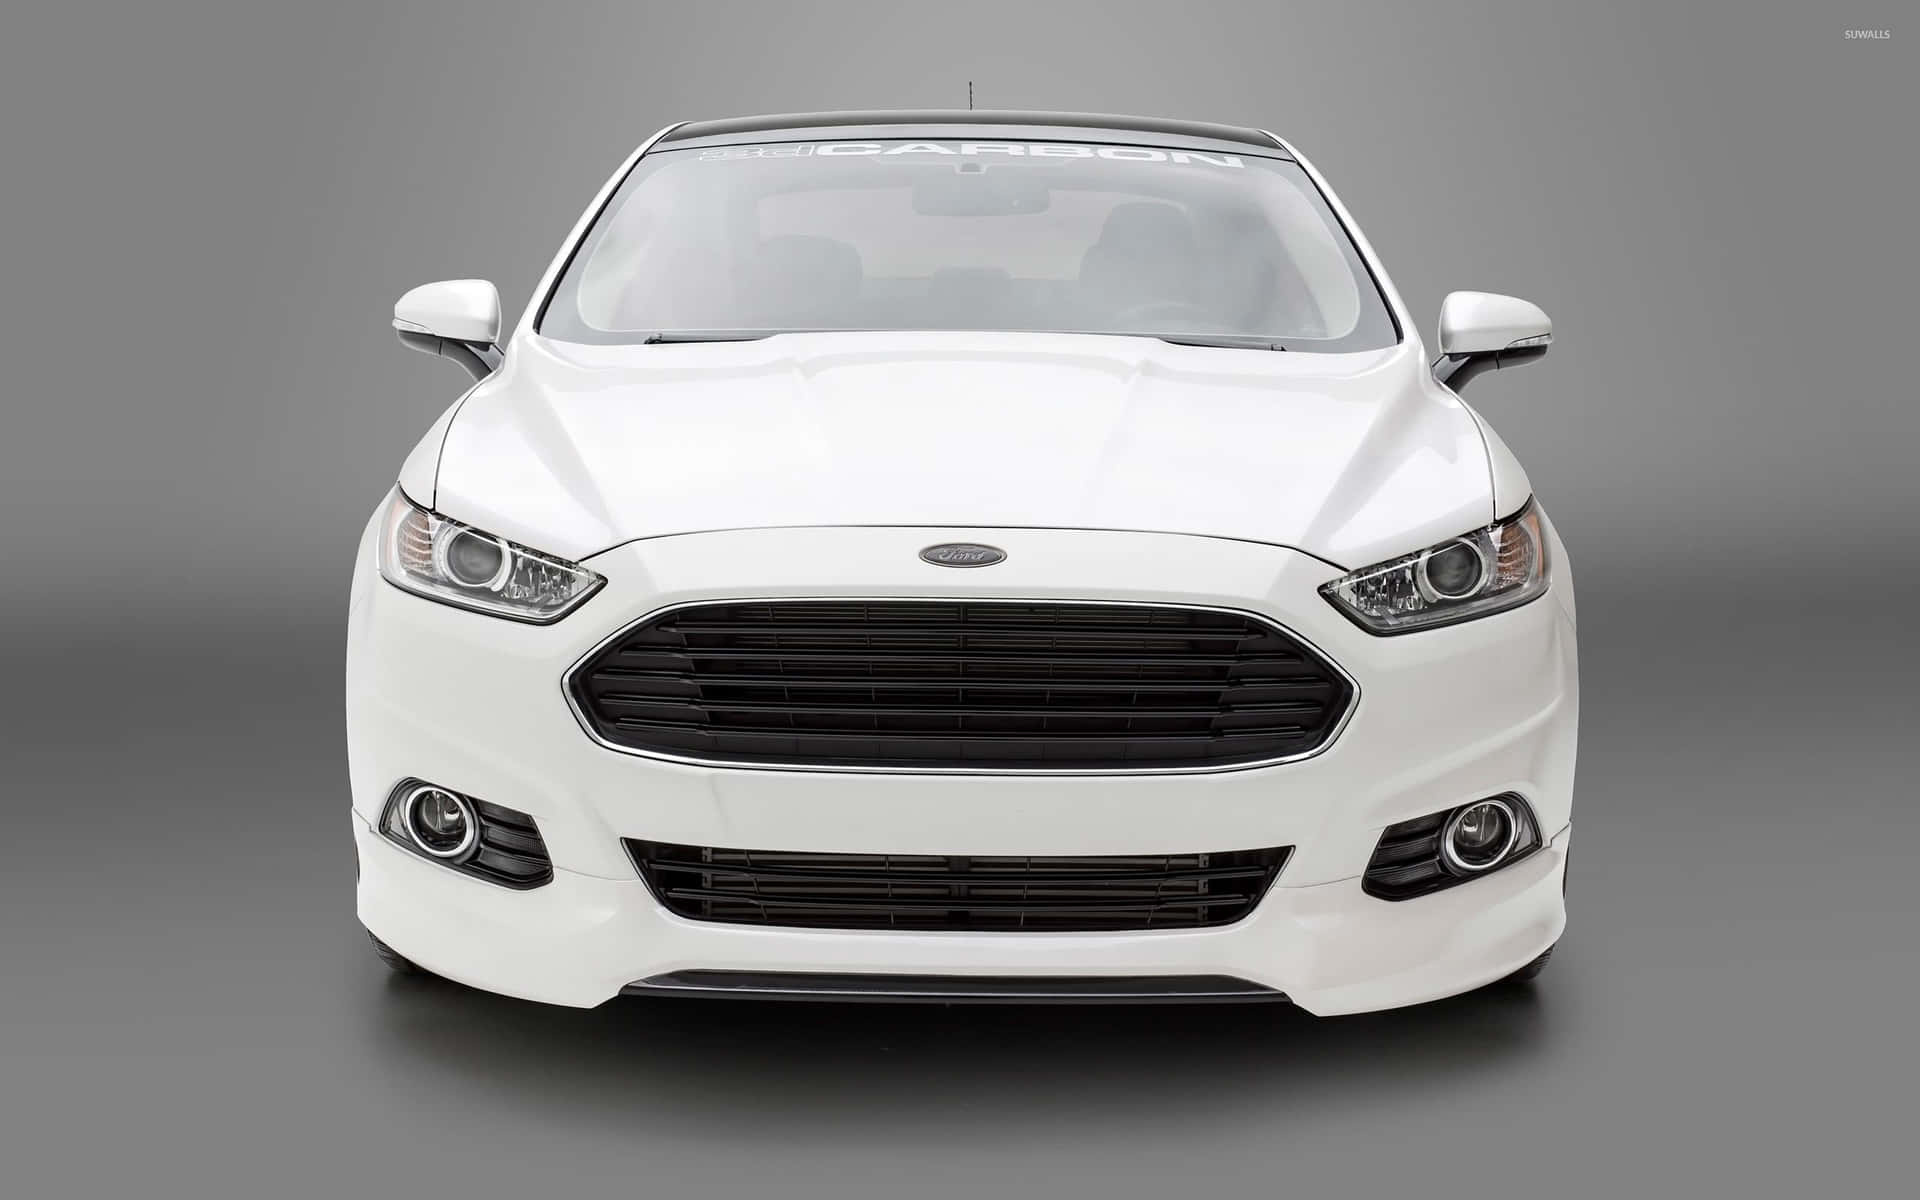 Captivating Ford Fusion on the Road Wallpaper